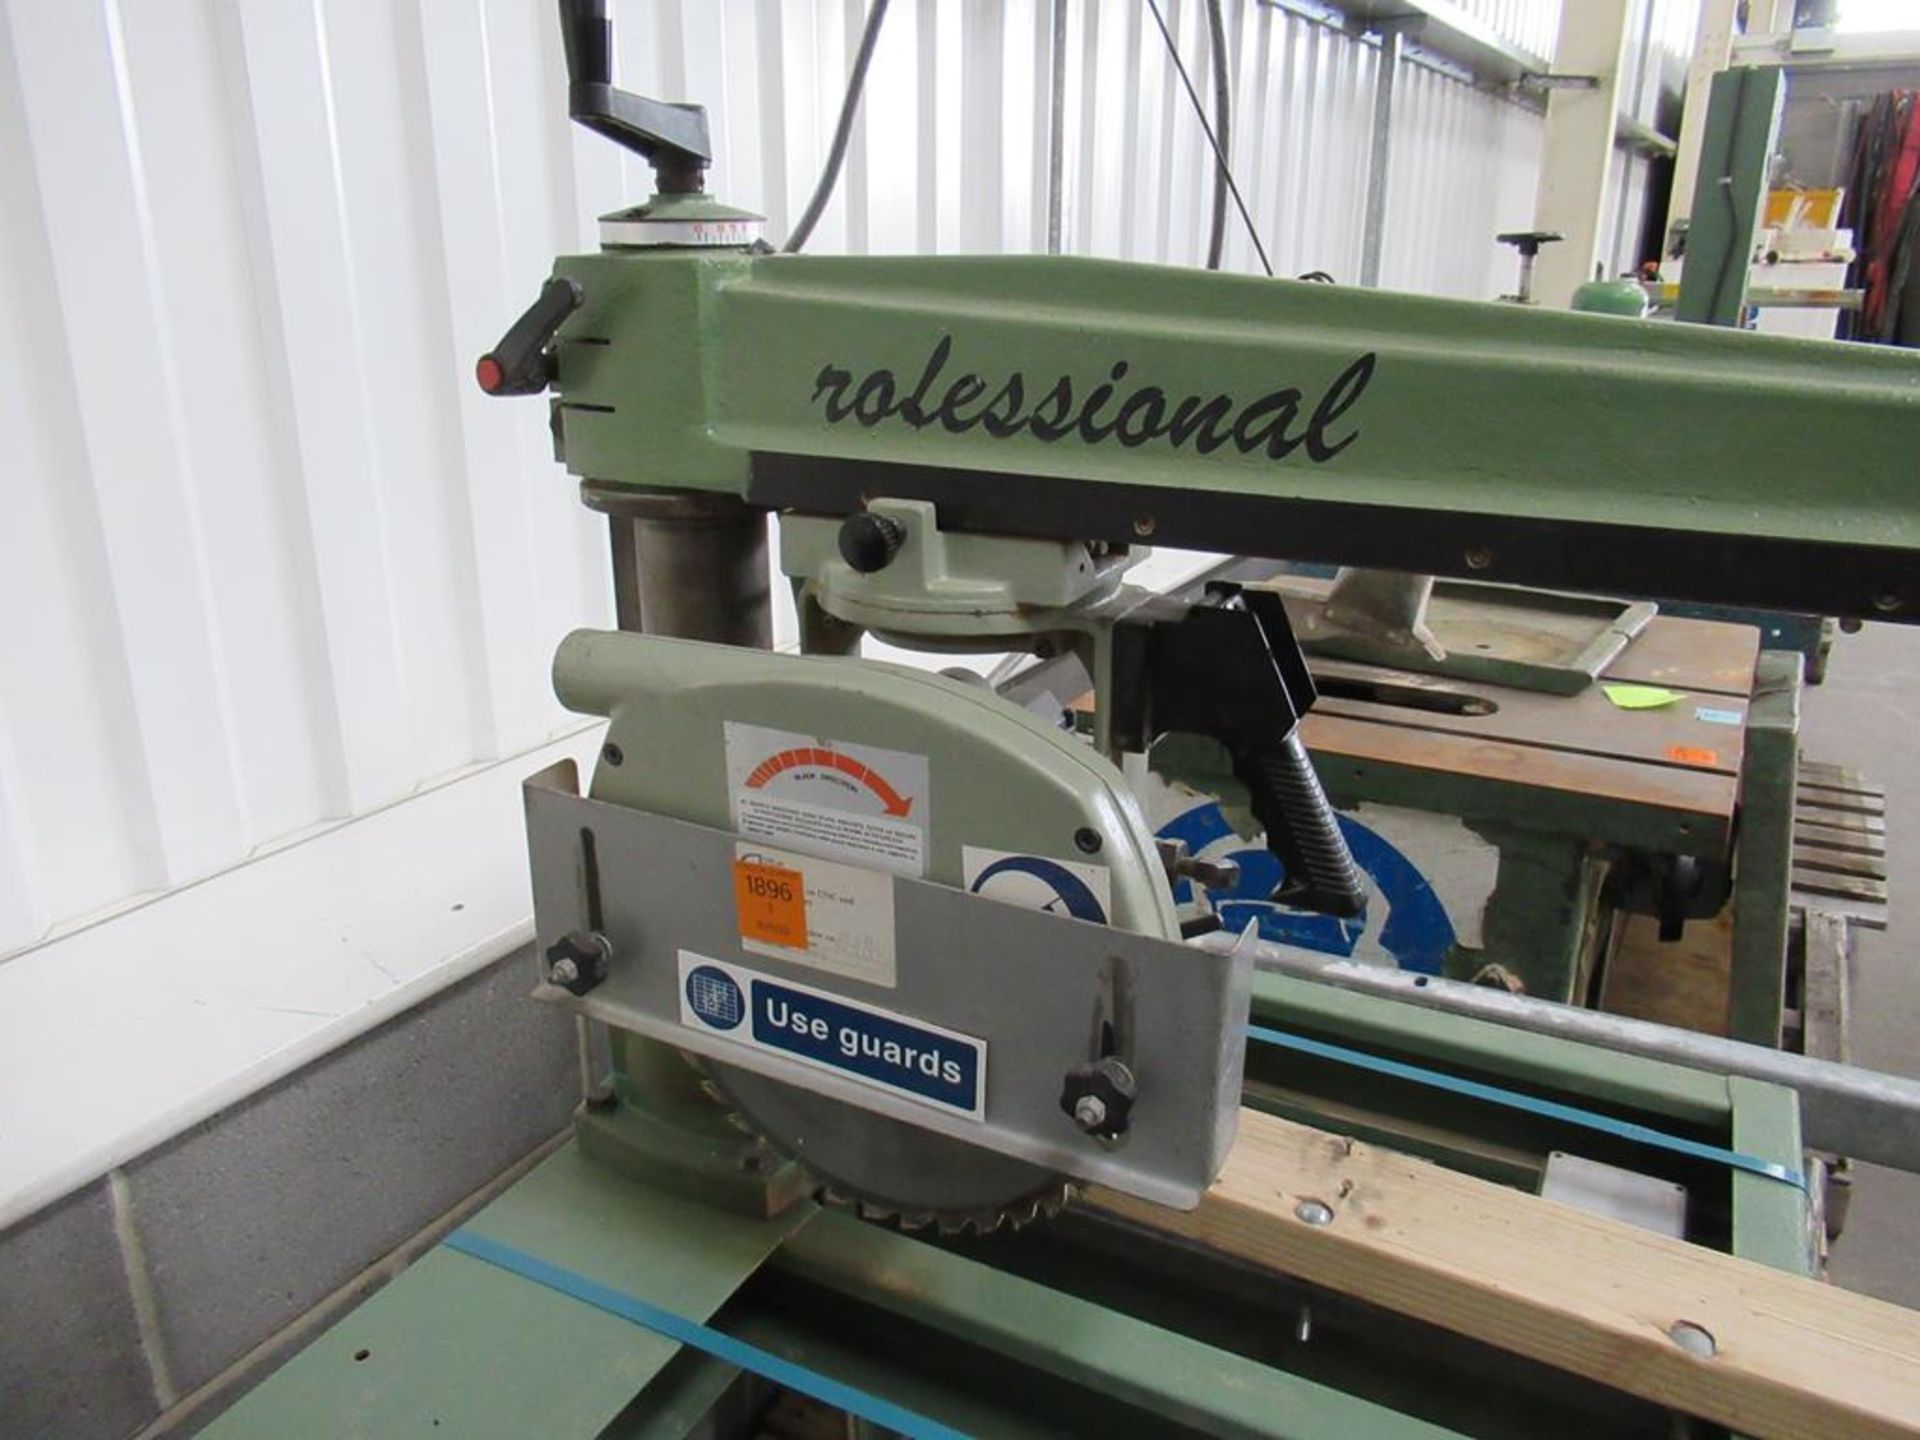 A rolessional radial arm cross cut saw, 415V, 3 phase. - Image 5 of 6